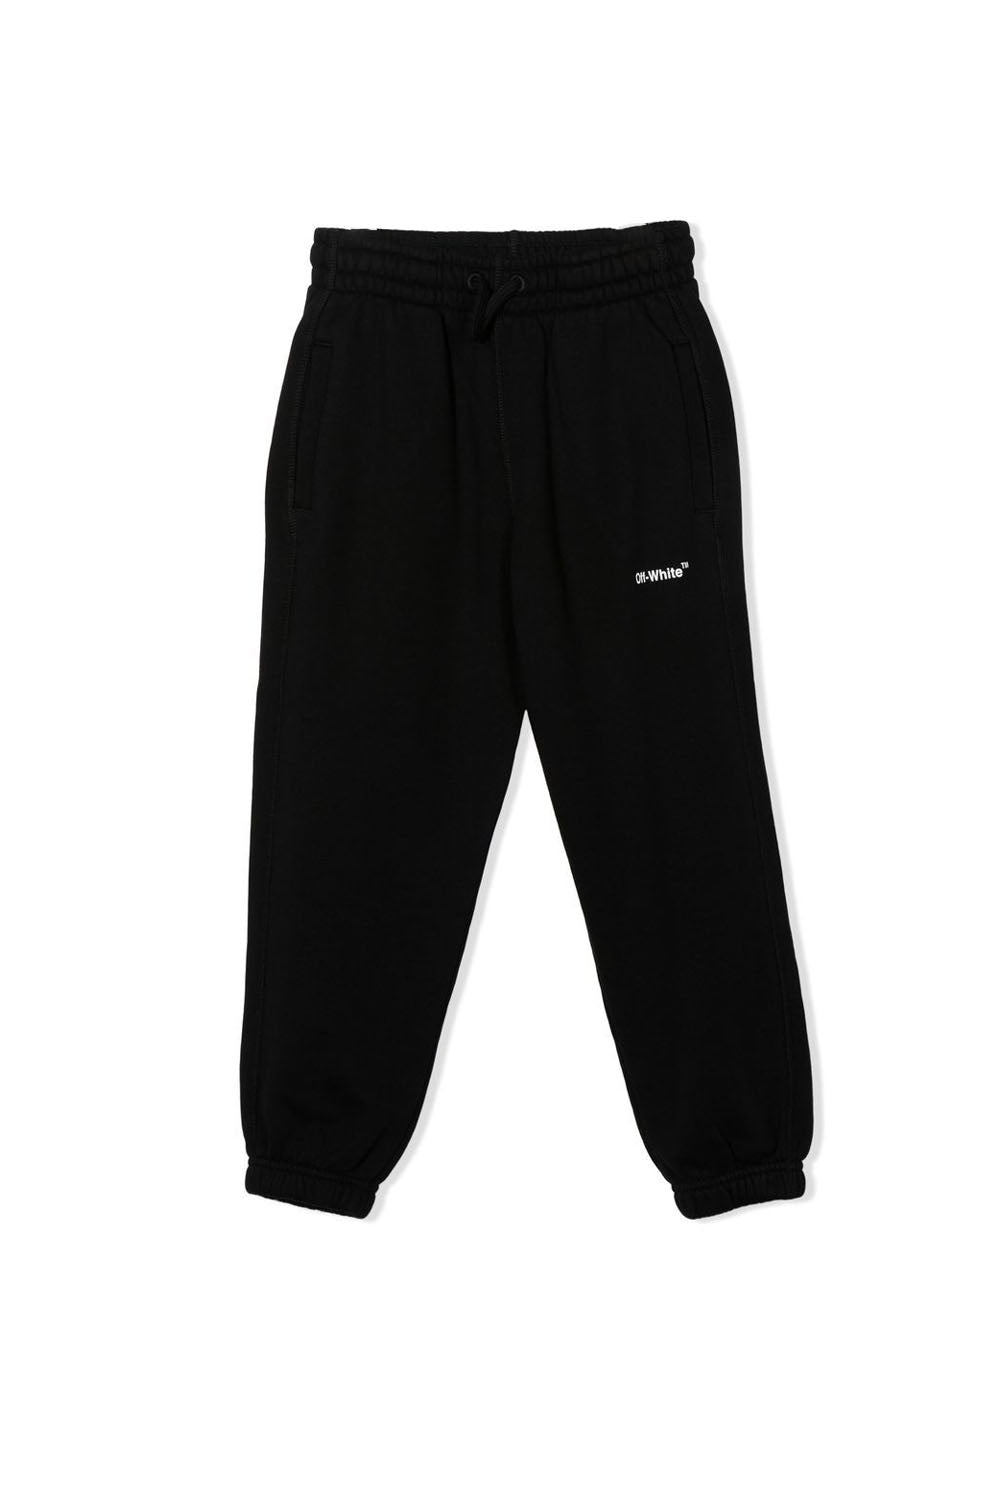 Rubber Arrow Sweat Pant for Boys